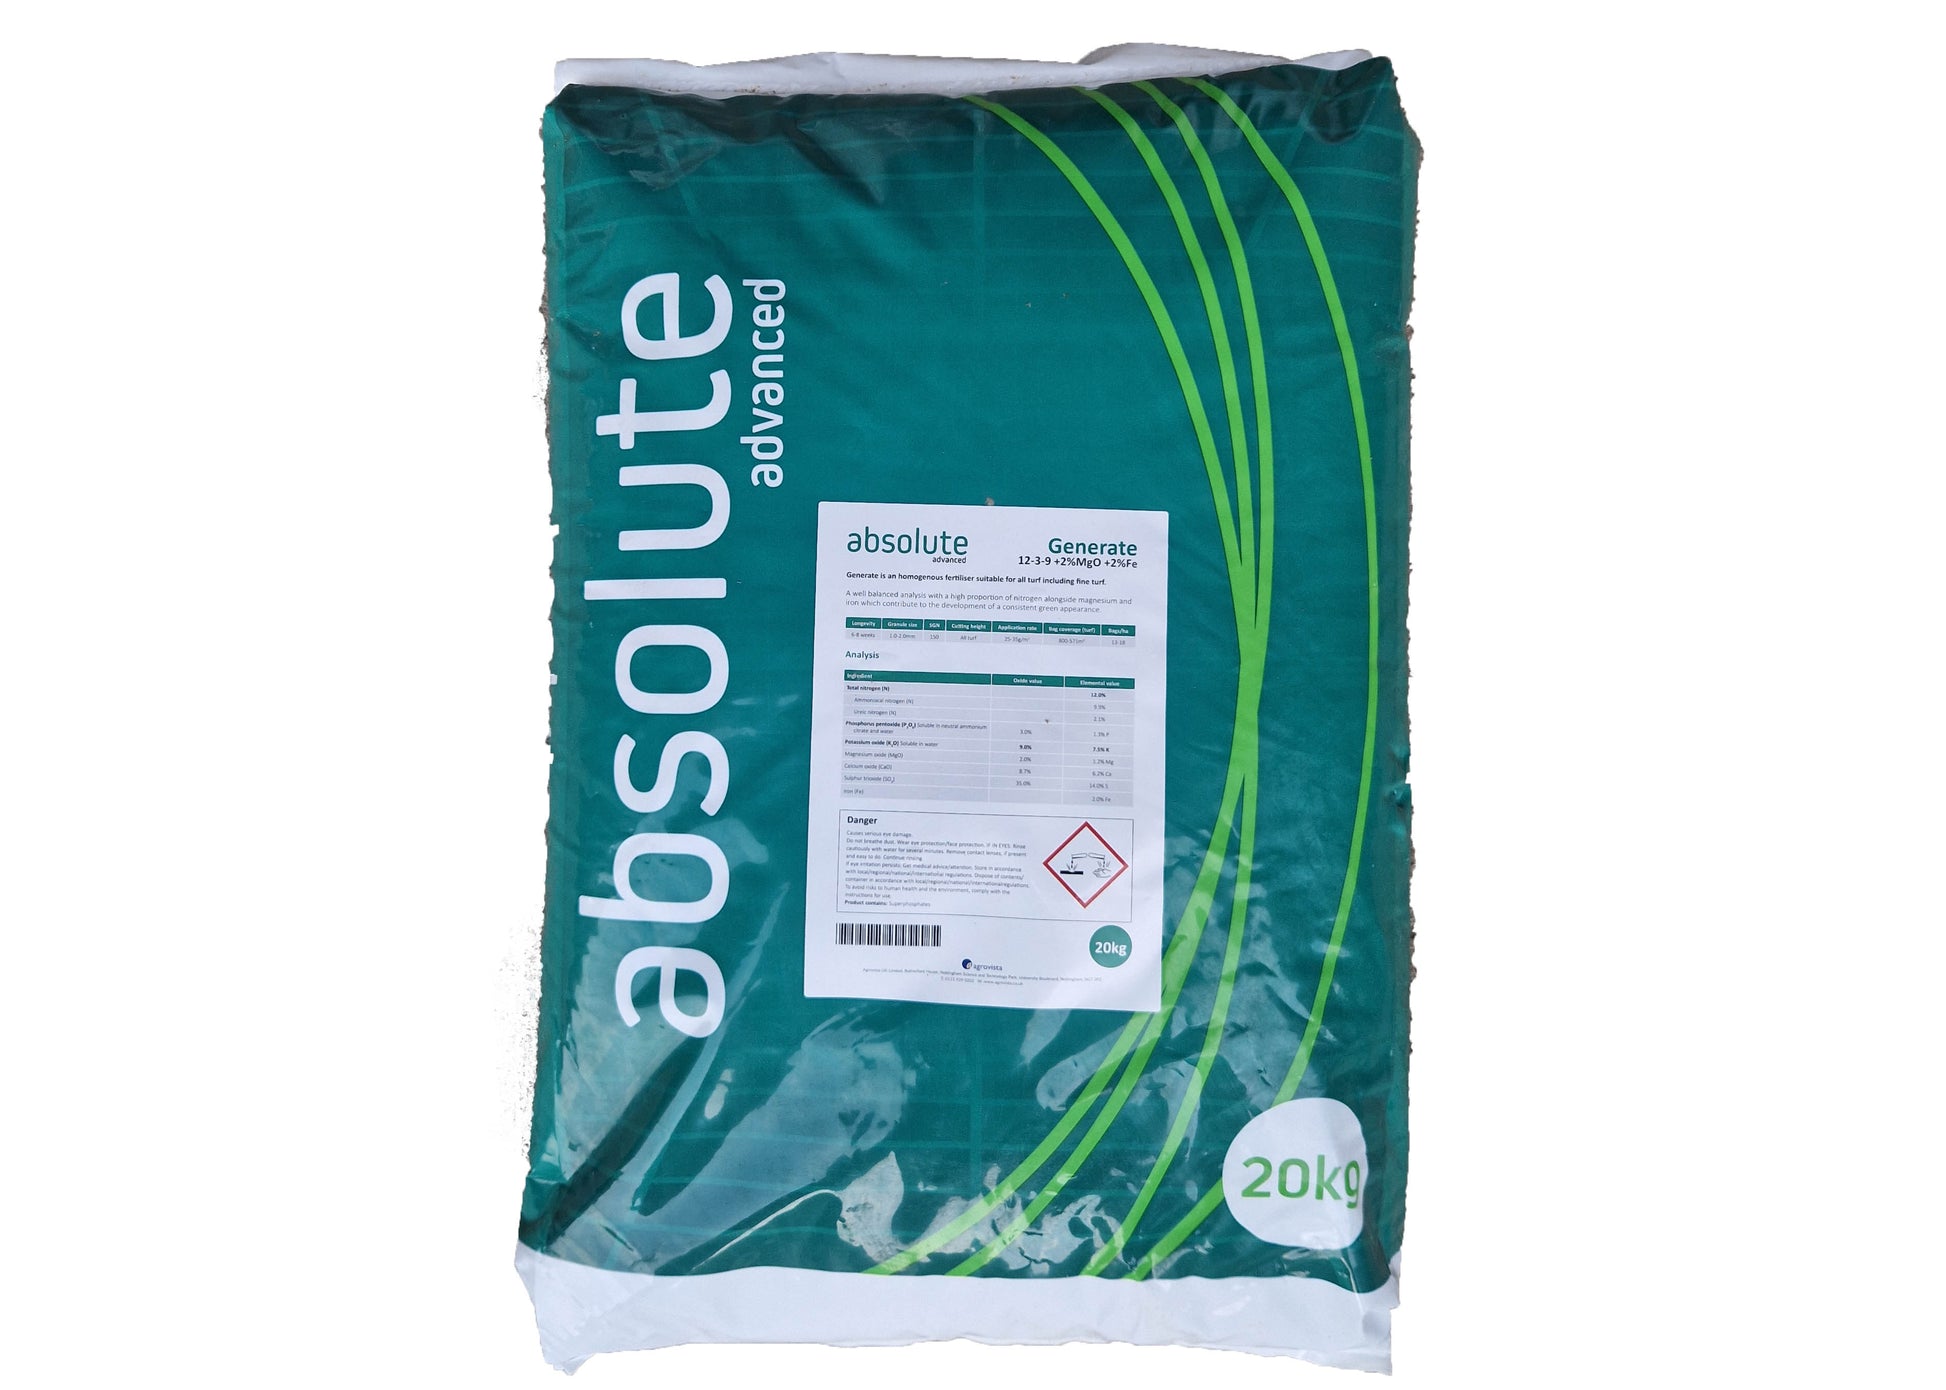 photo showing the sack of absolute lawn fertiliser